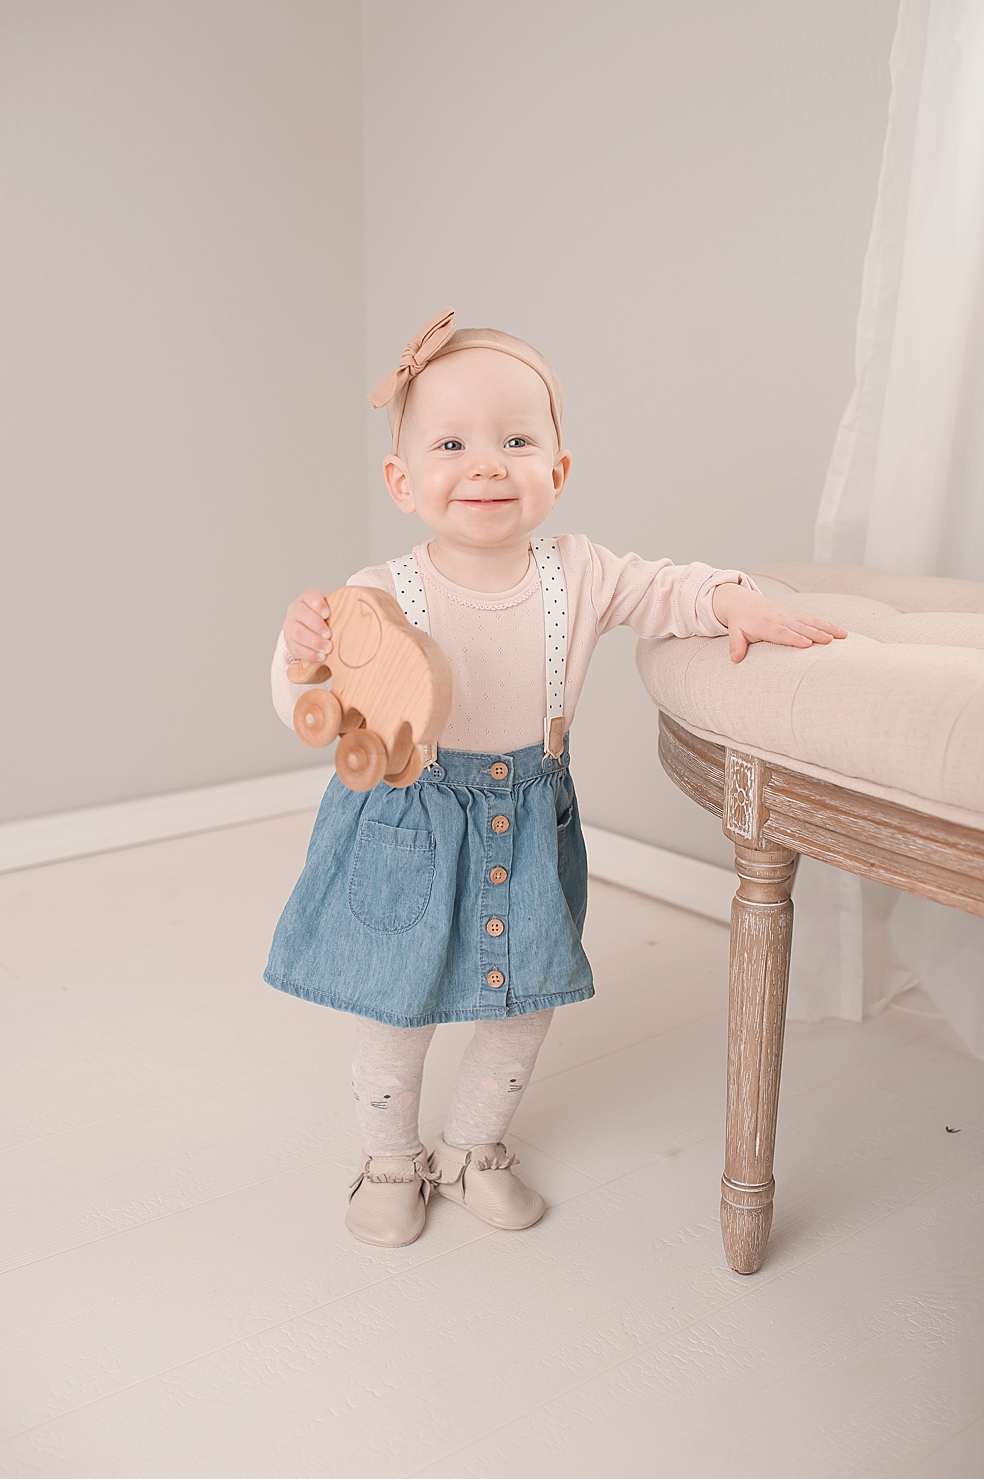 Toddler girl standing and holding a wooden elephant | Photo by Decatur Alabama Baby Photographer Jessica Lee 